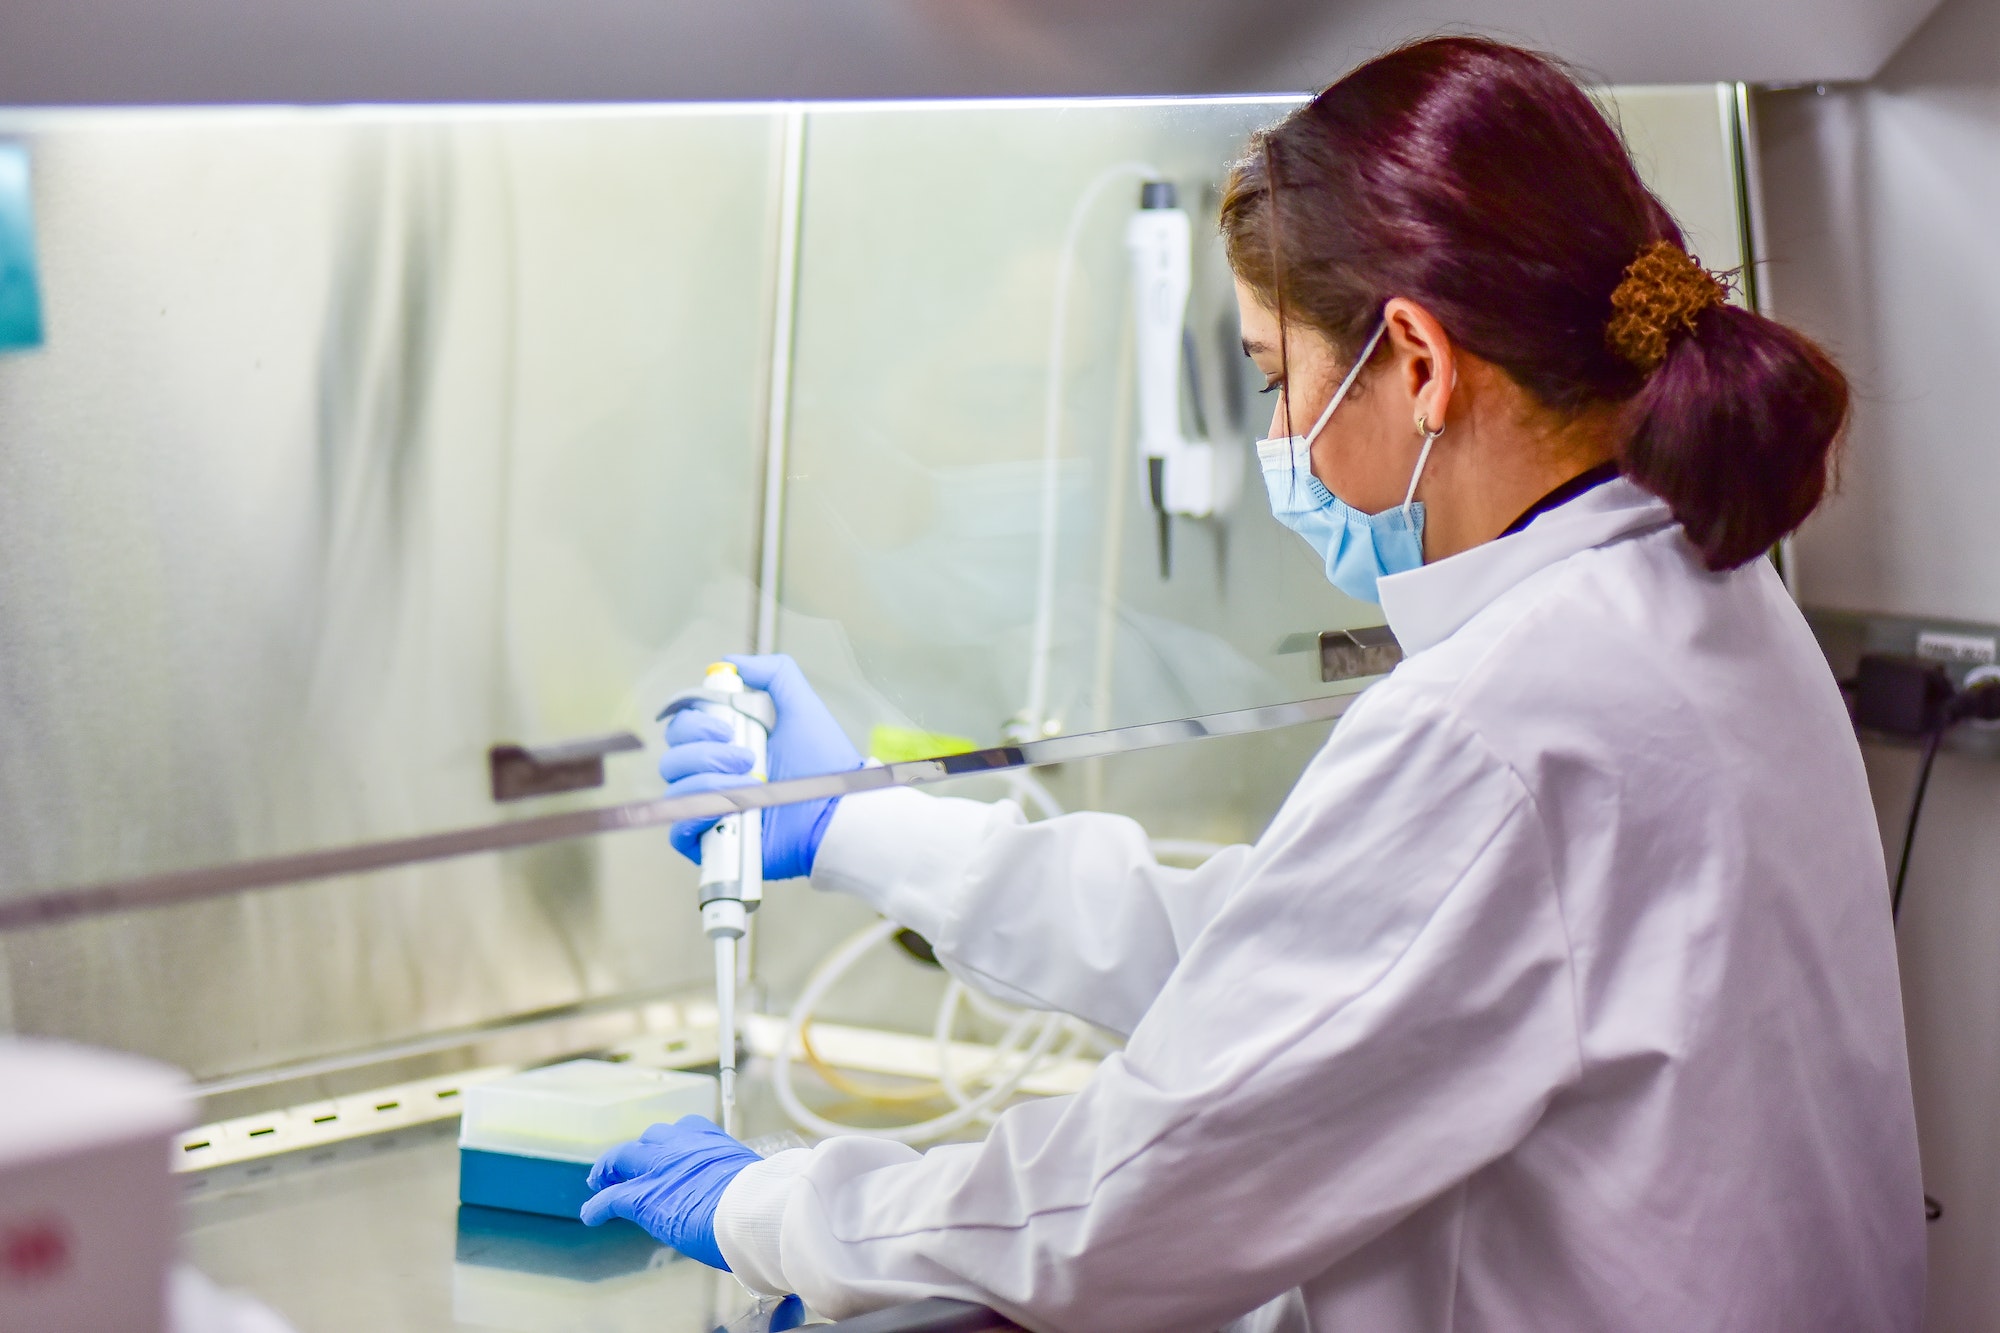 Woman researcher working in a bio safety cabinet